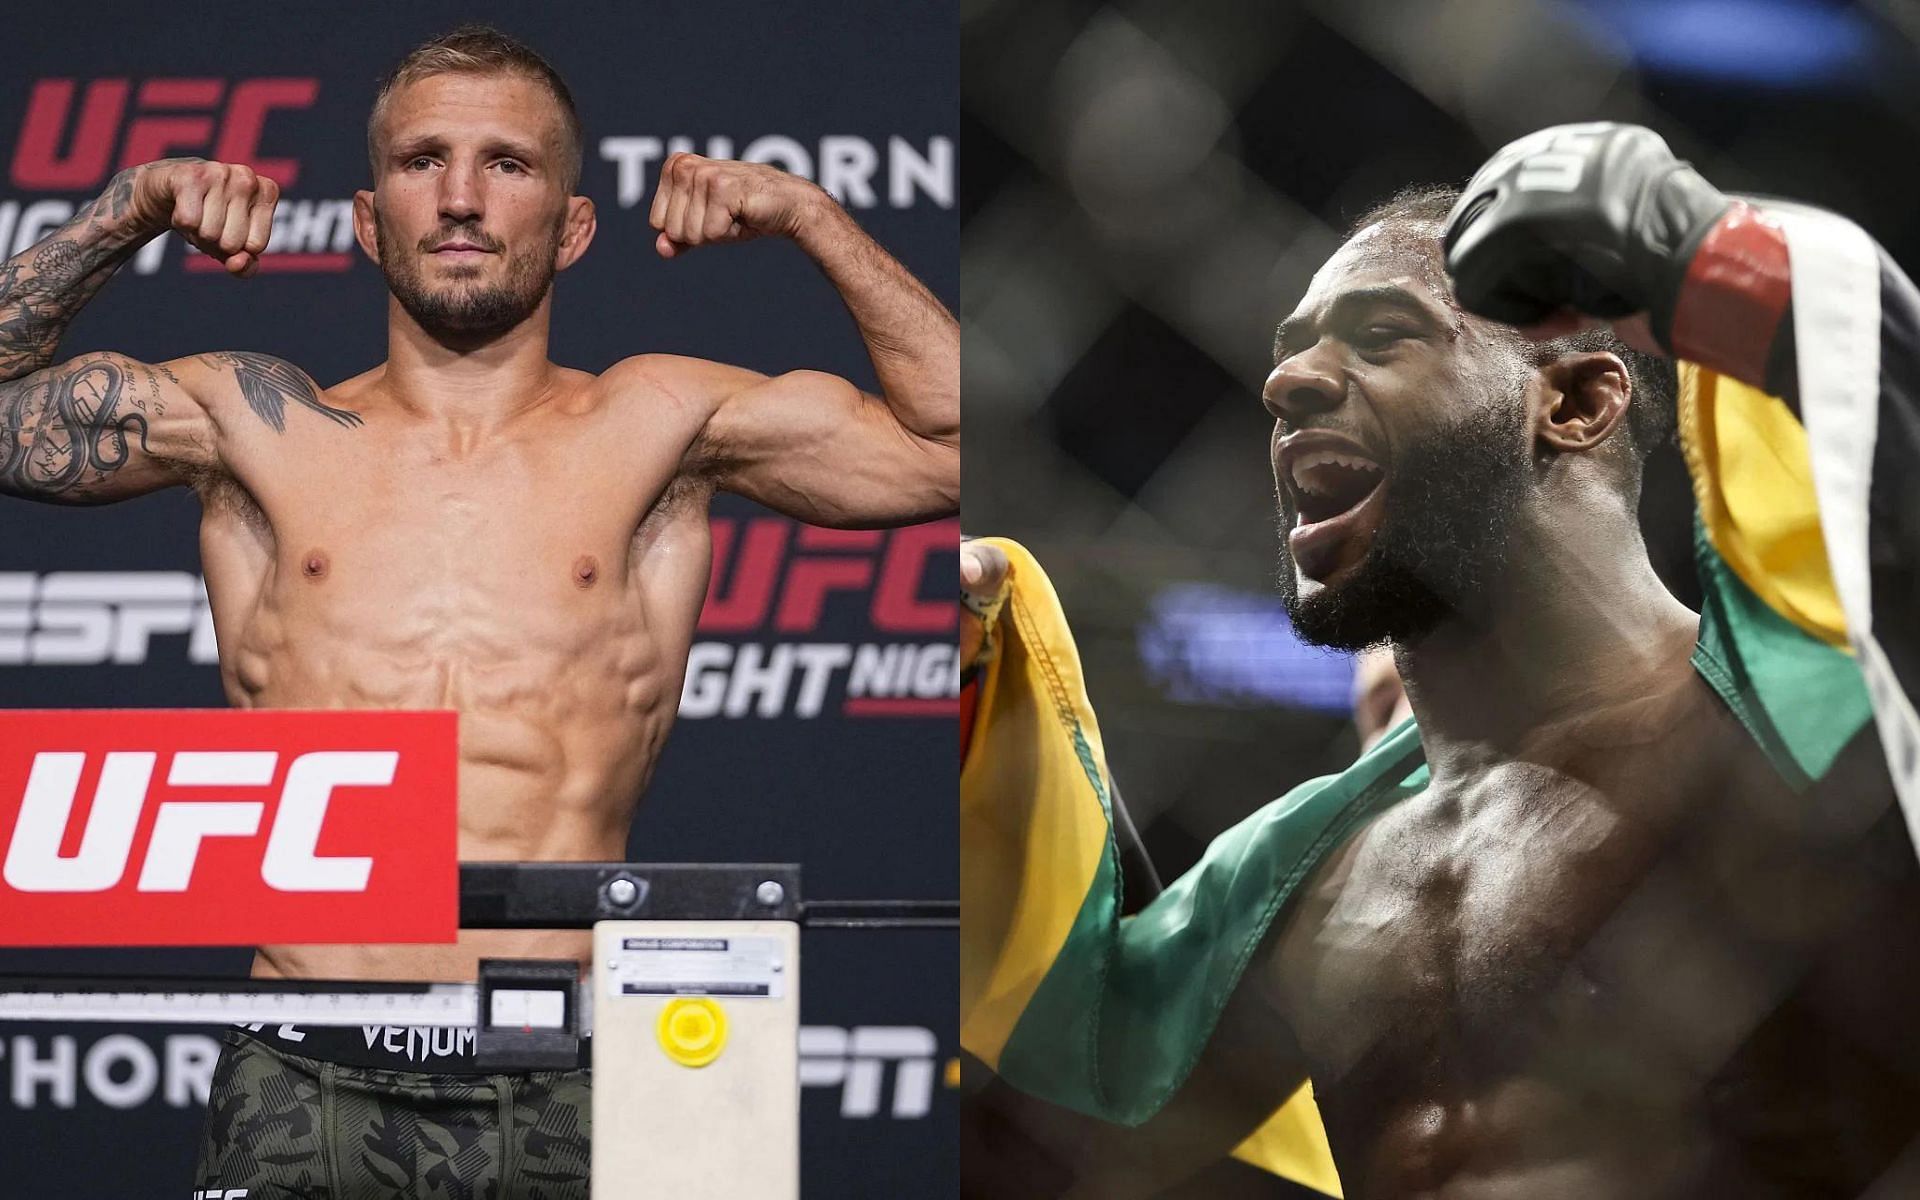 T.J. Dillashaw (left) and Aljamain Sterling (right) [Images courtesy of Getty]